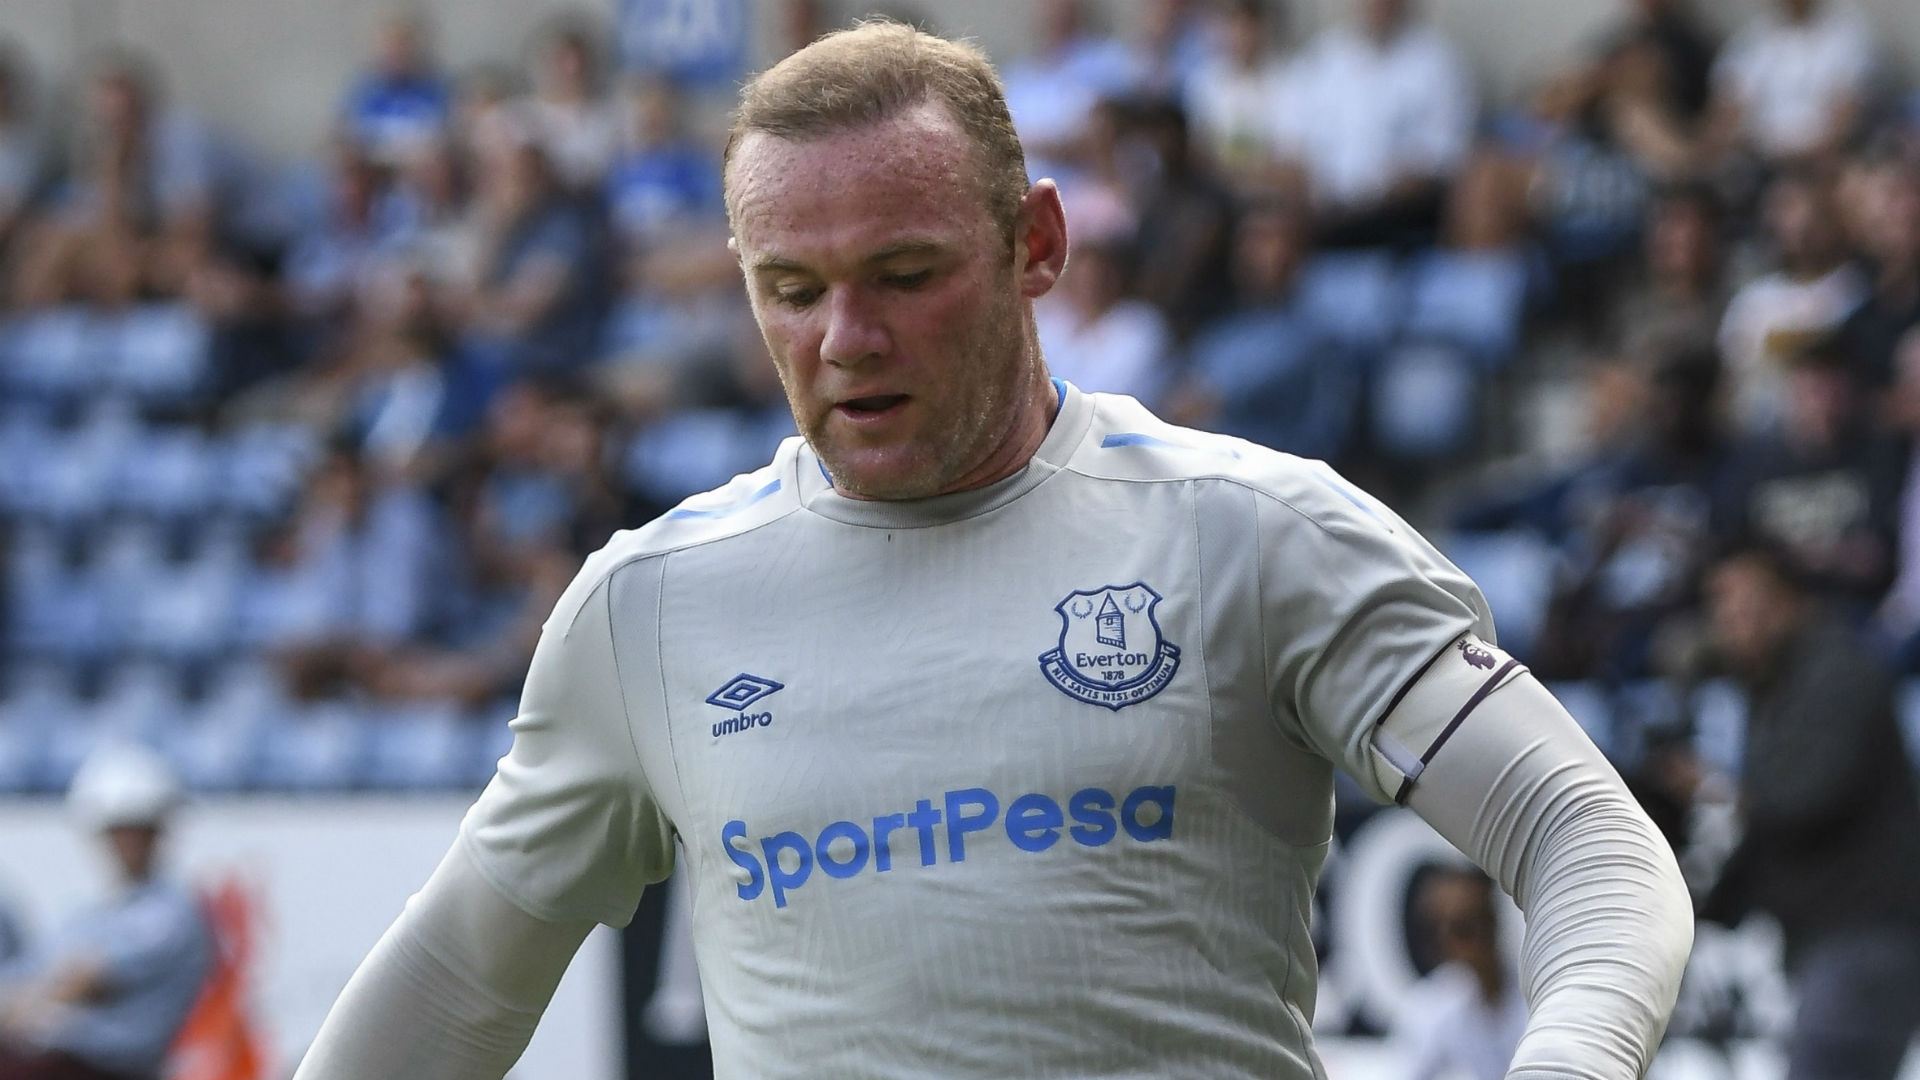 However, while Mourinho must surely miss Rooney's influence on the team, he also knows that the reason the player wanted to leave had to do with his decreased role at in the team.